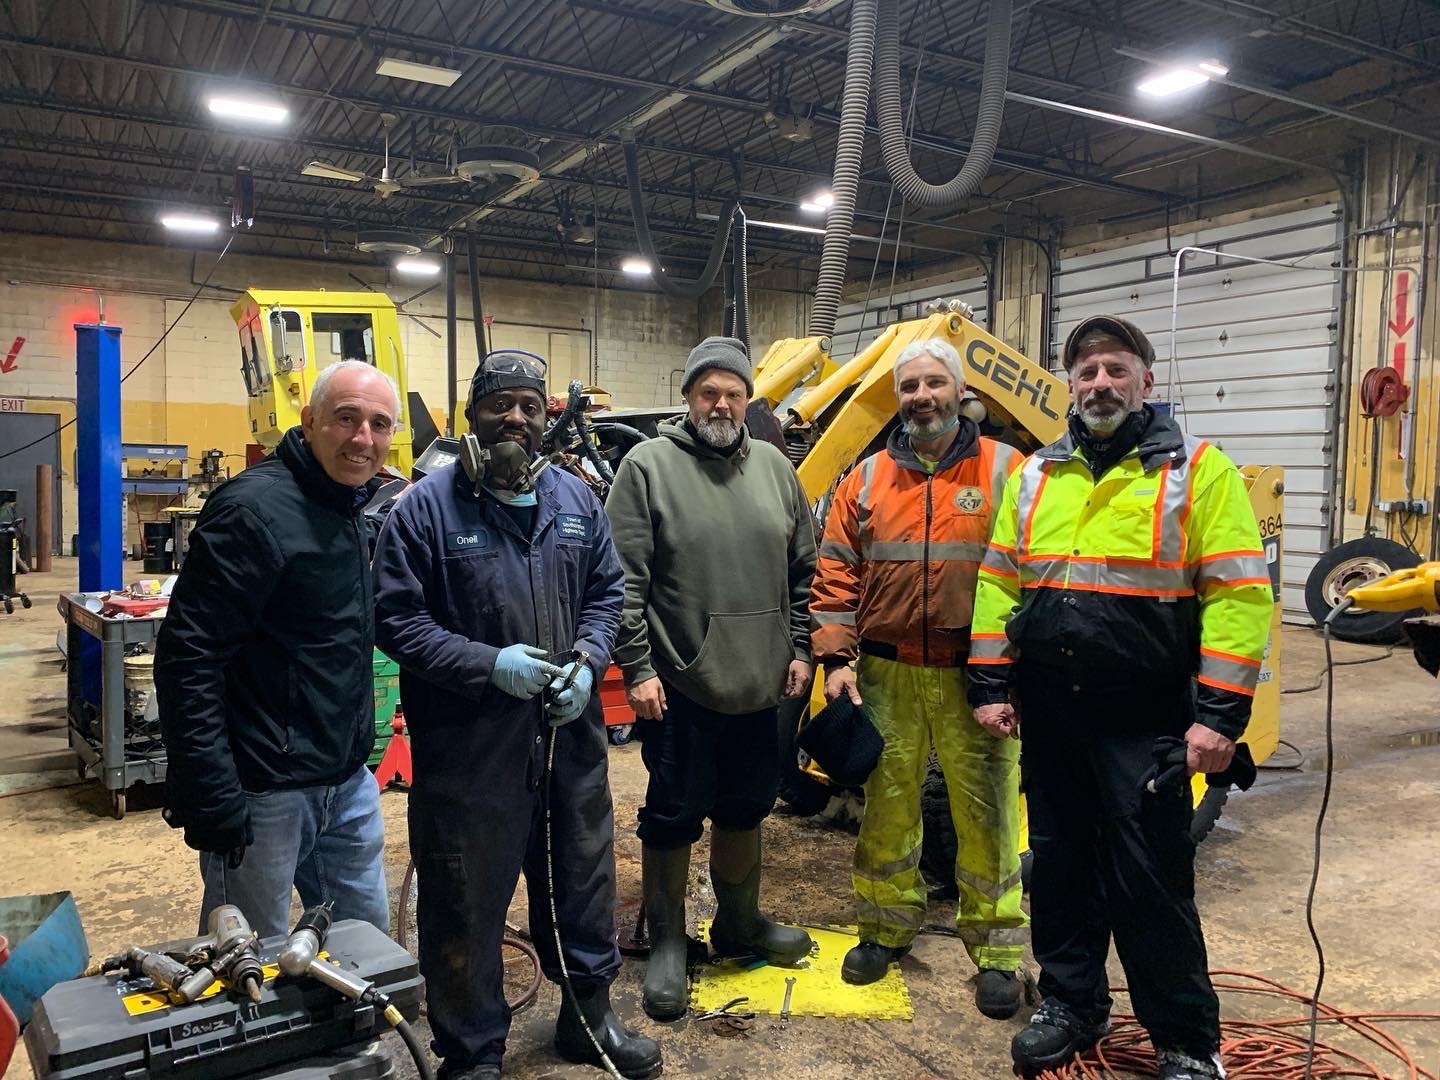 From left, Southampton Town Supervisor Jay Schneiderman with highway department crew members O'Neil Stewart, James Wilson, Mark Pothier, and Highway Superintendent Charlie McArdle. Highway department crew members worked for two days with very few breaks and were still working on the roads on Monday morning.